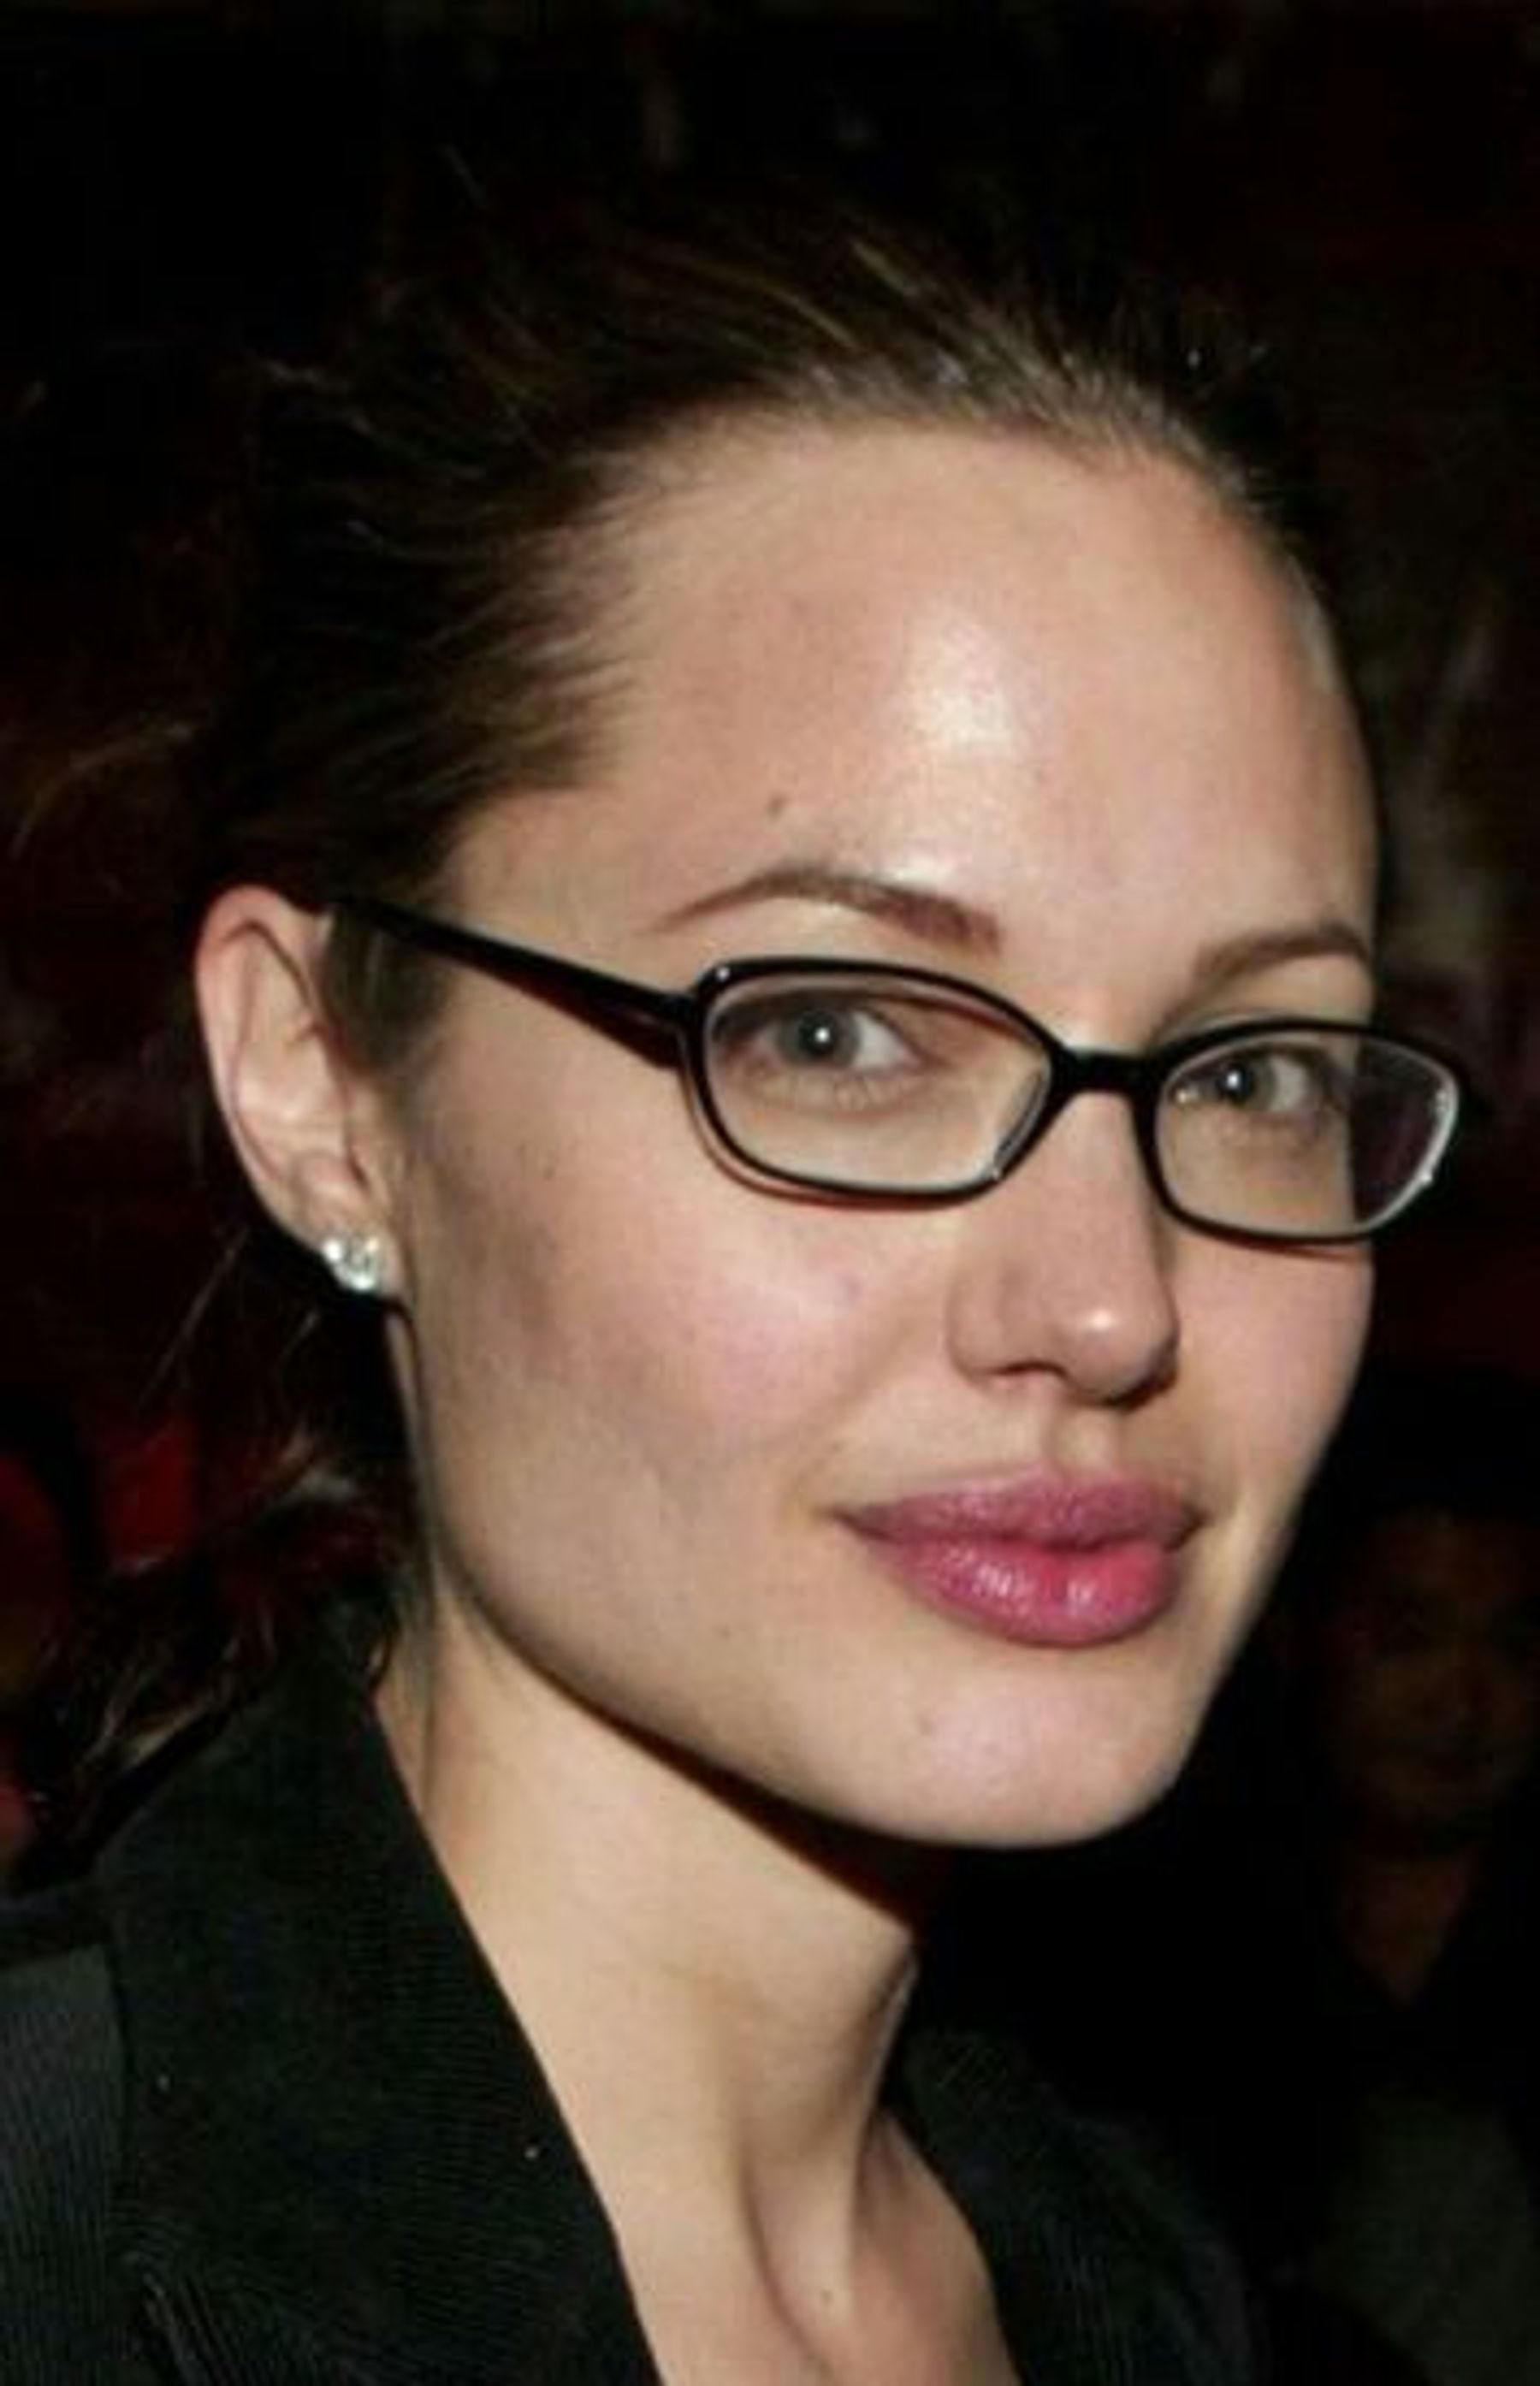 Angelina Jolie wearing eyeglasses with no makeup on